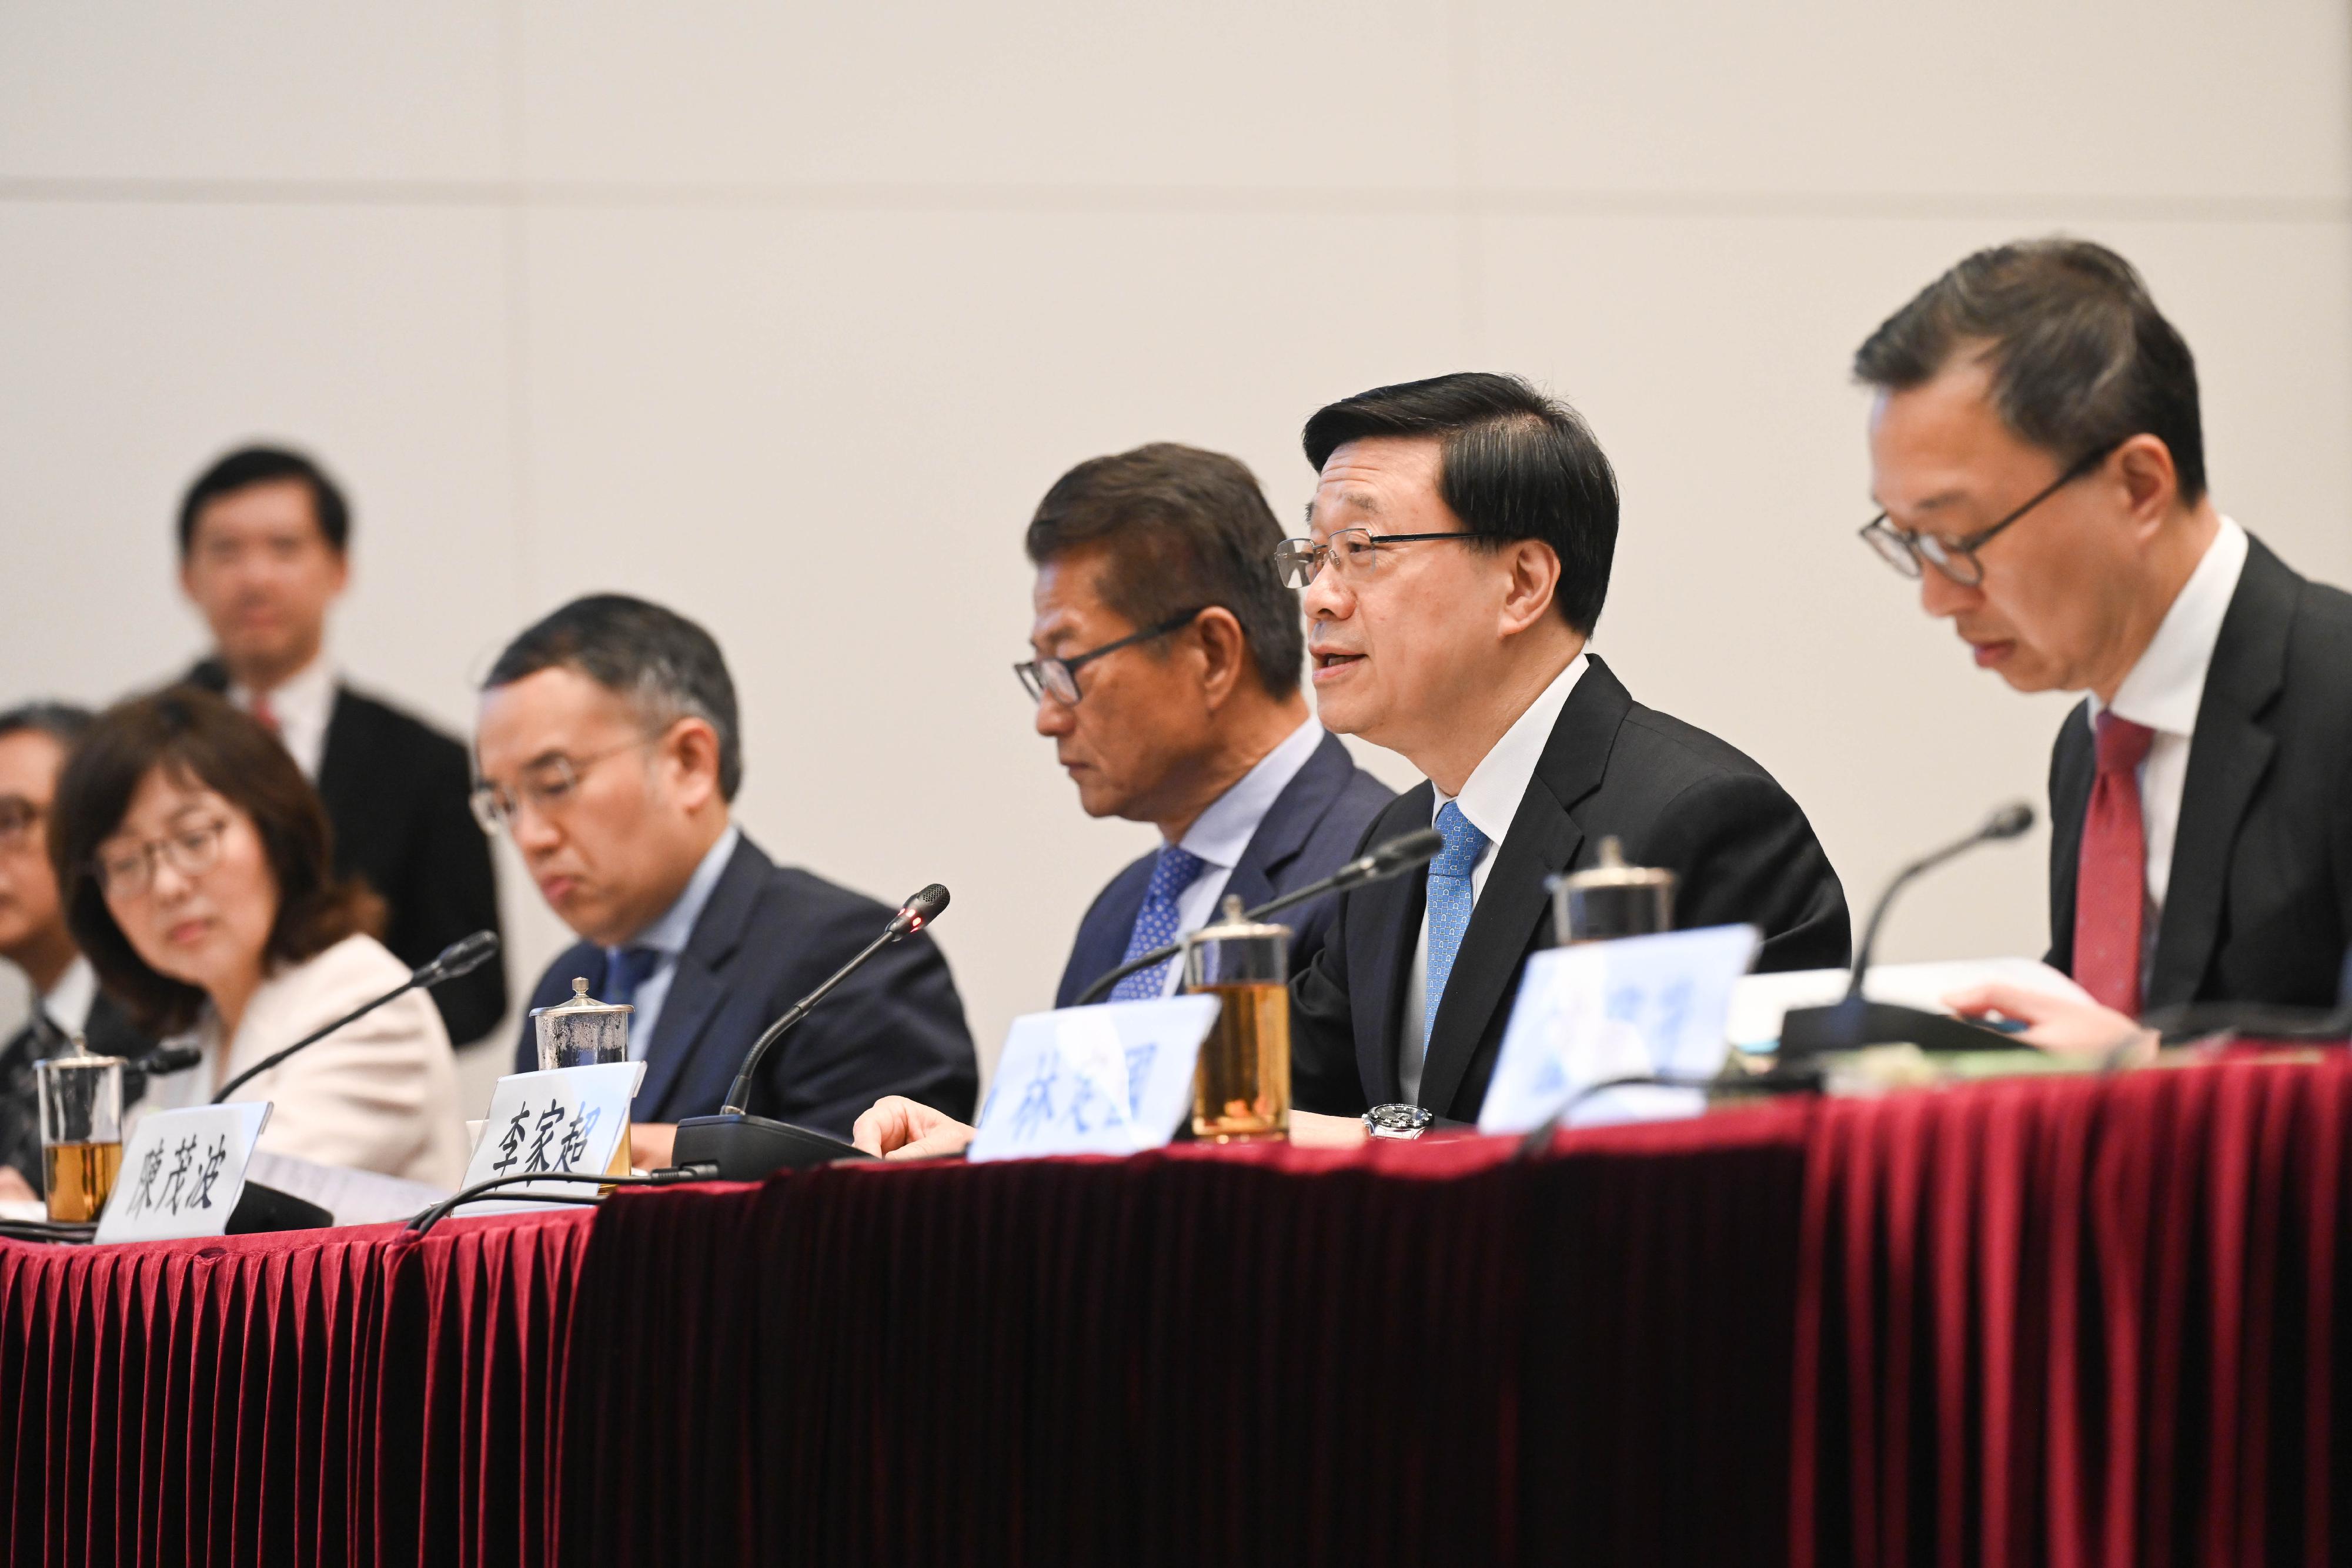 The Chief Executive, Mr John Lee, led a Hong Kong Special Administrative Region Government delegation to attend the 6th Plenary Session of the Hong Kong/Shanghai Co-operation Conference in the Central Government Offices today (April 26). Photo shows Mr Lee (second right) delivering opening remarks at the Plenary.
